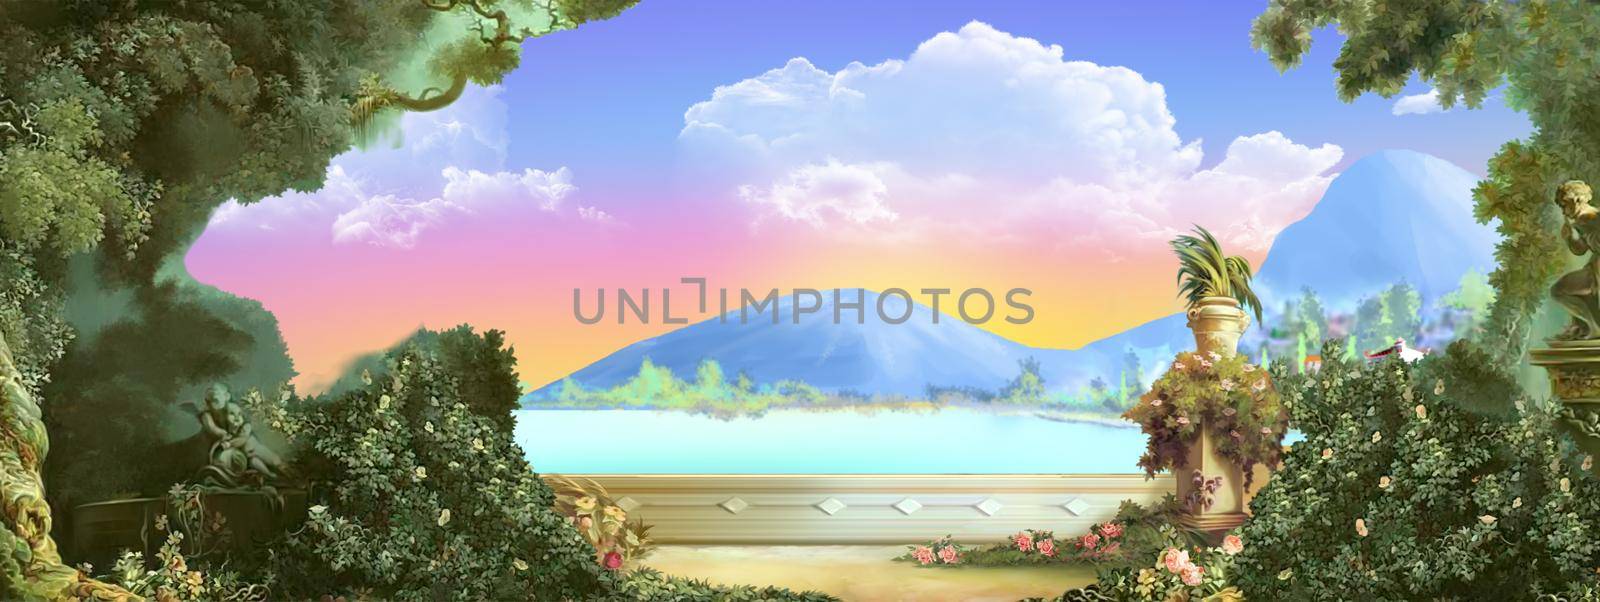 Sea view from the old park on a sunny day. Digital Painting Background, Illustration.